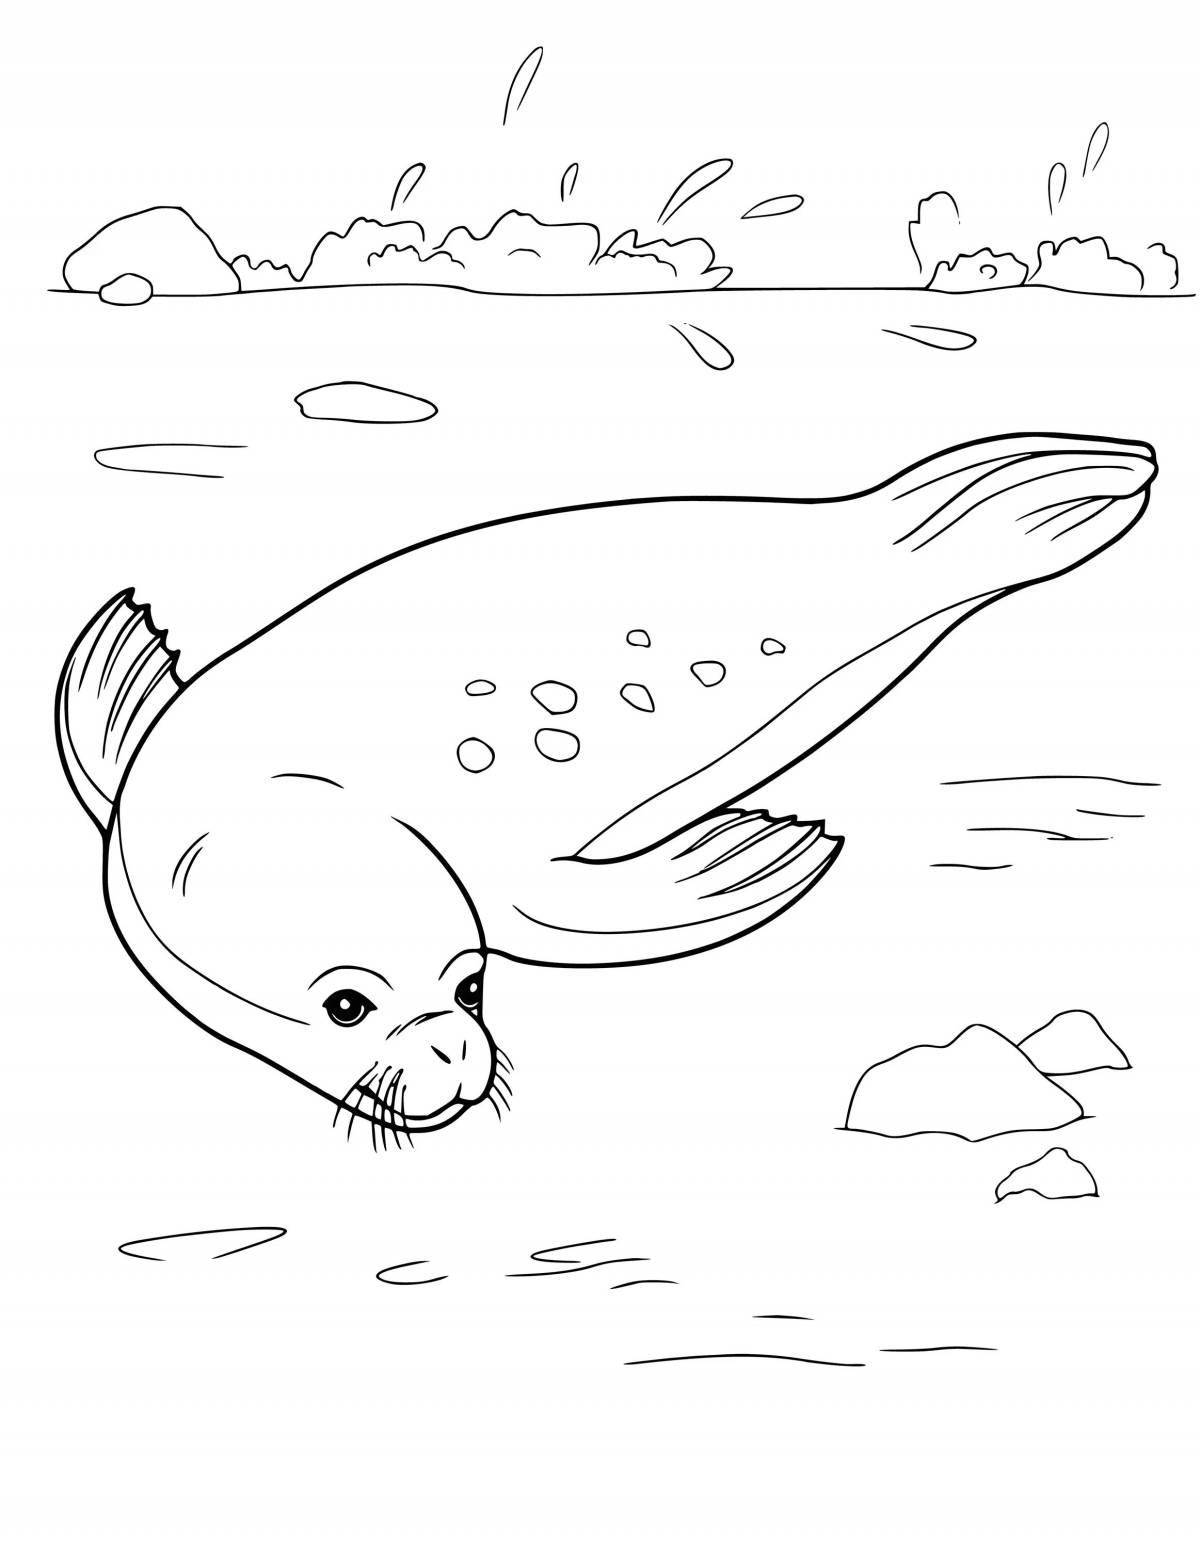 Bright Baikal seal coloring book for kids